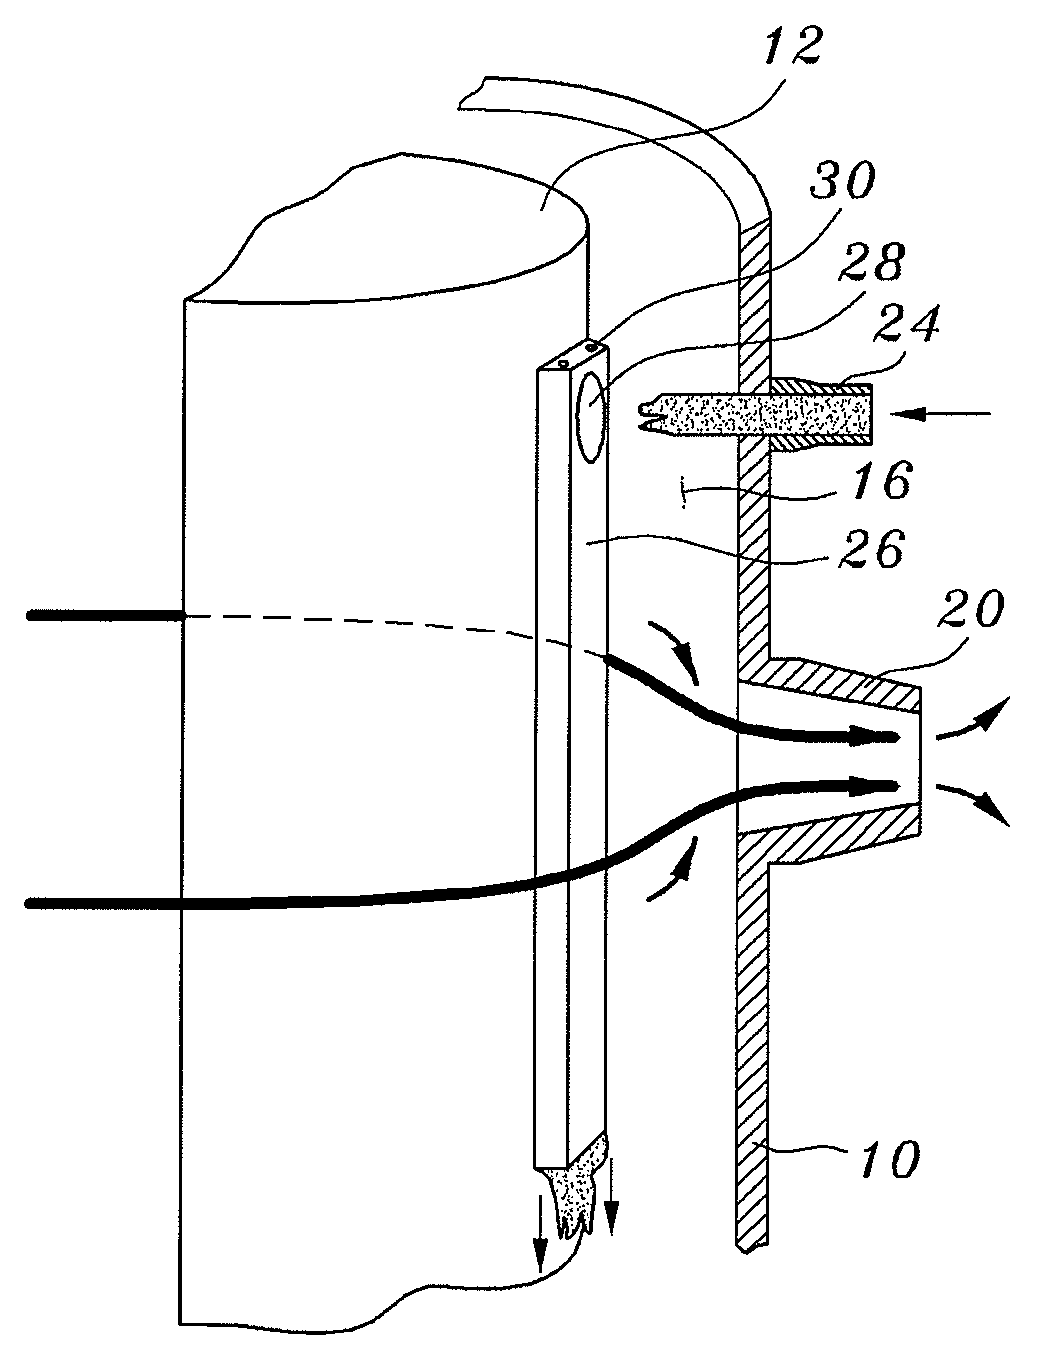 Emergency core cooling system having core barrel injection extension ducts